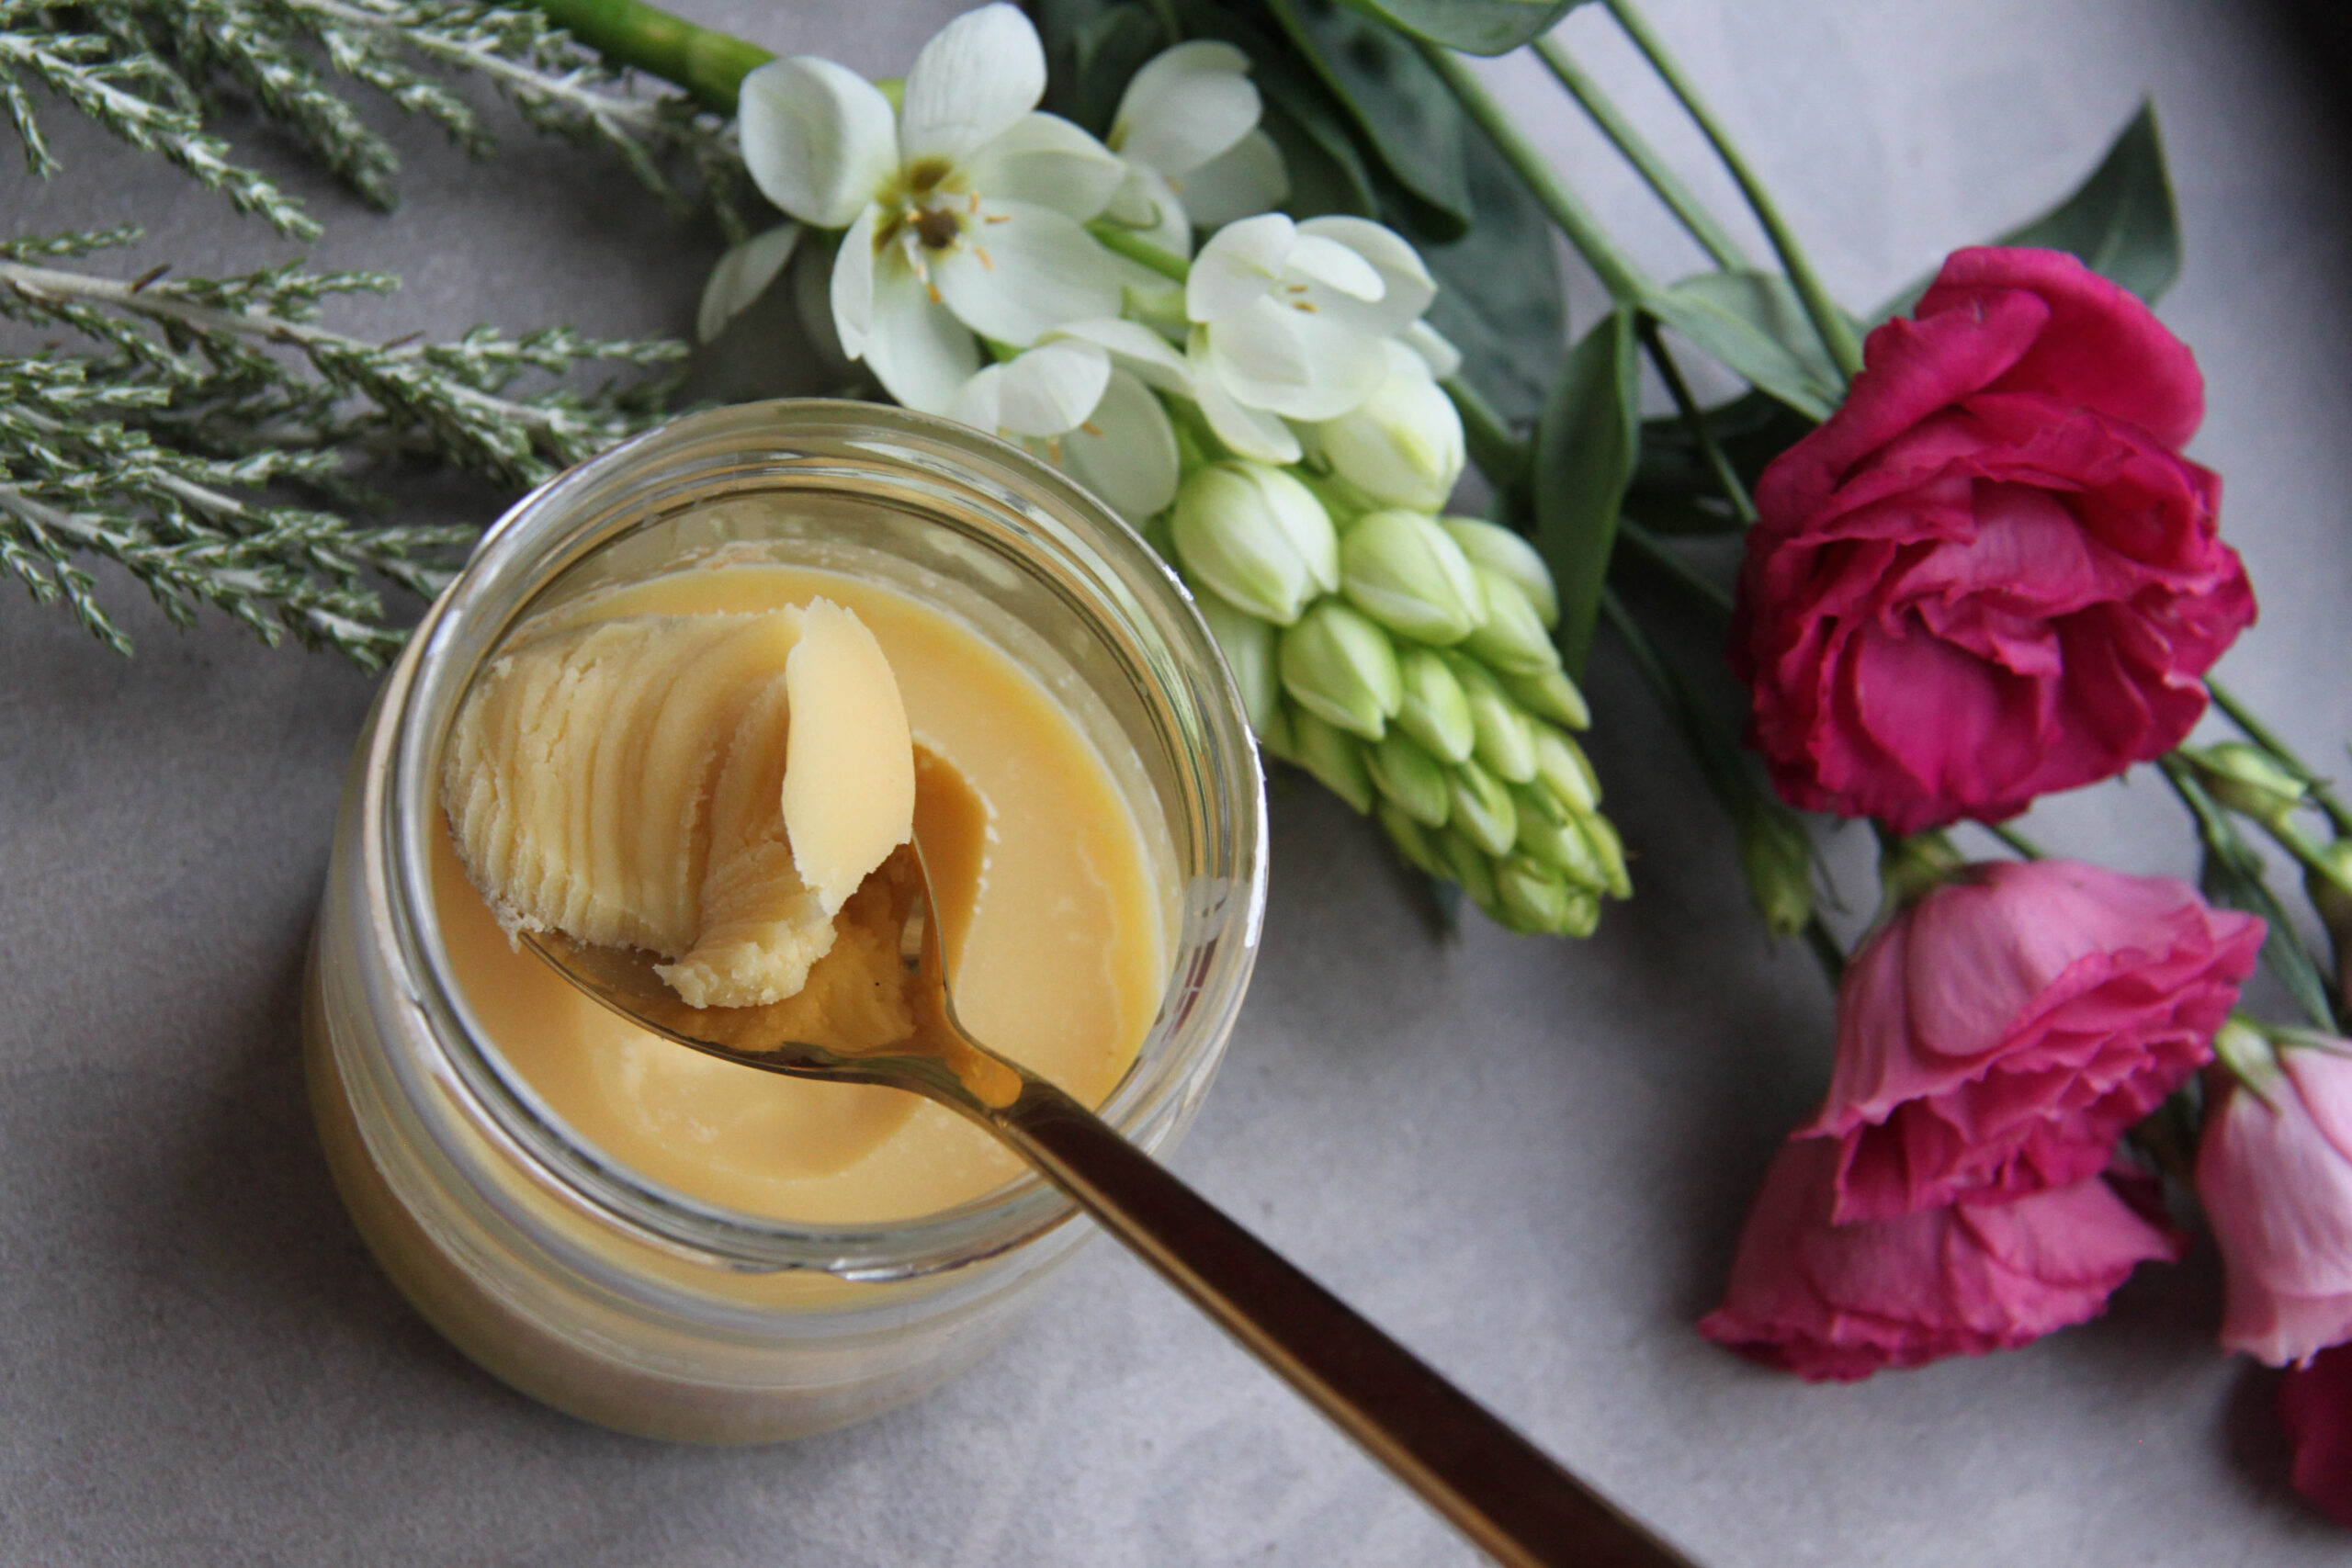 Find out the health benefits of ghee and how it can help digestion and fight obesity